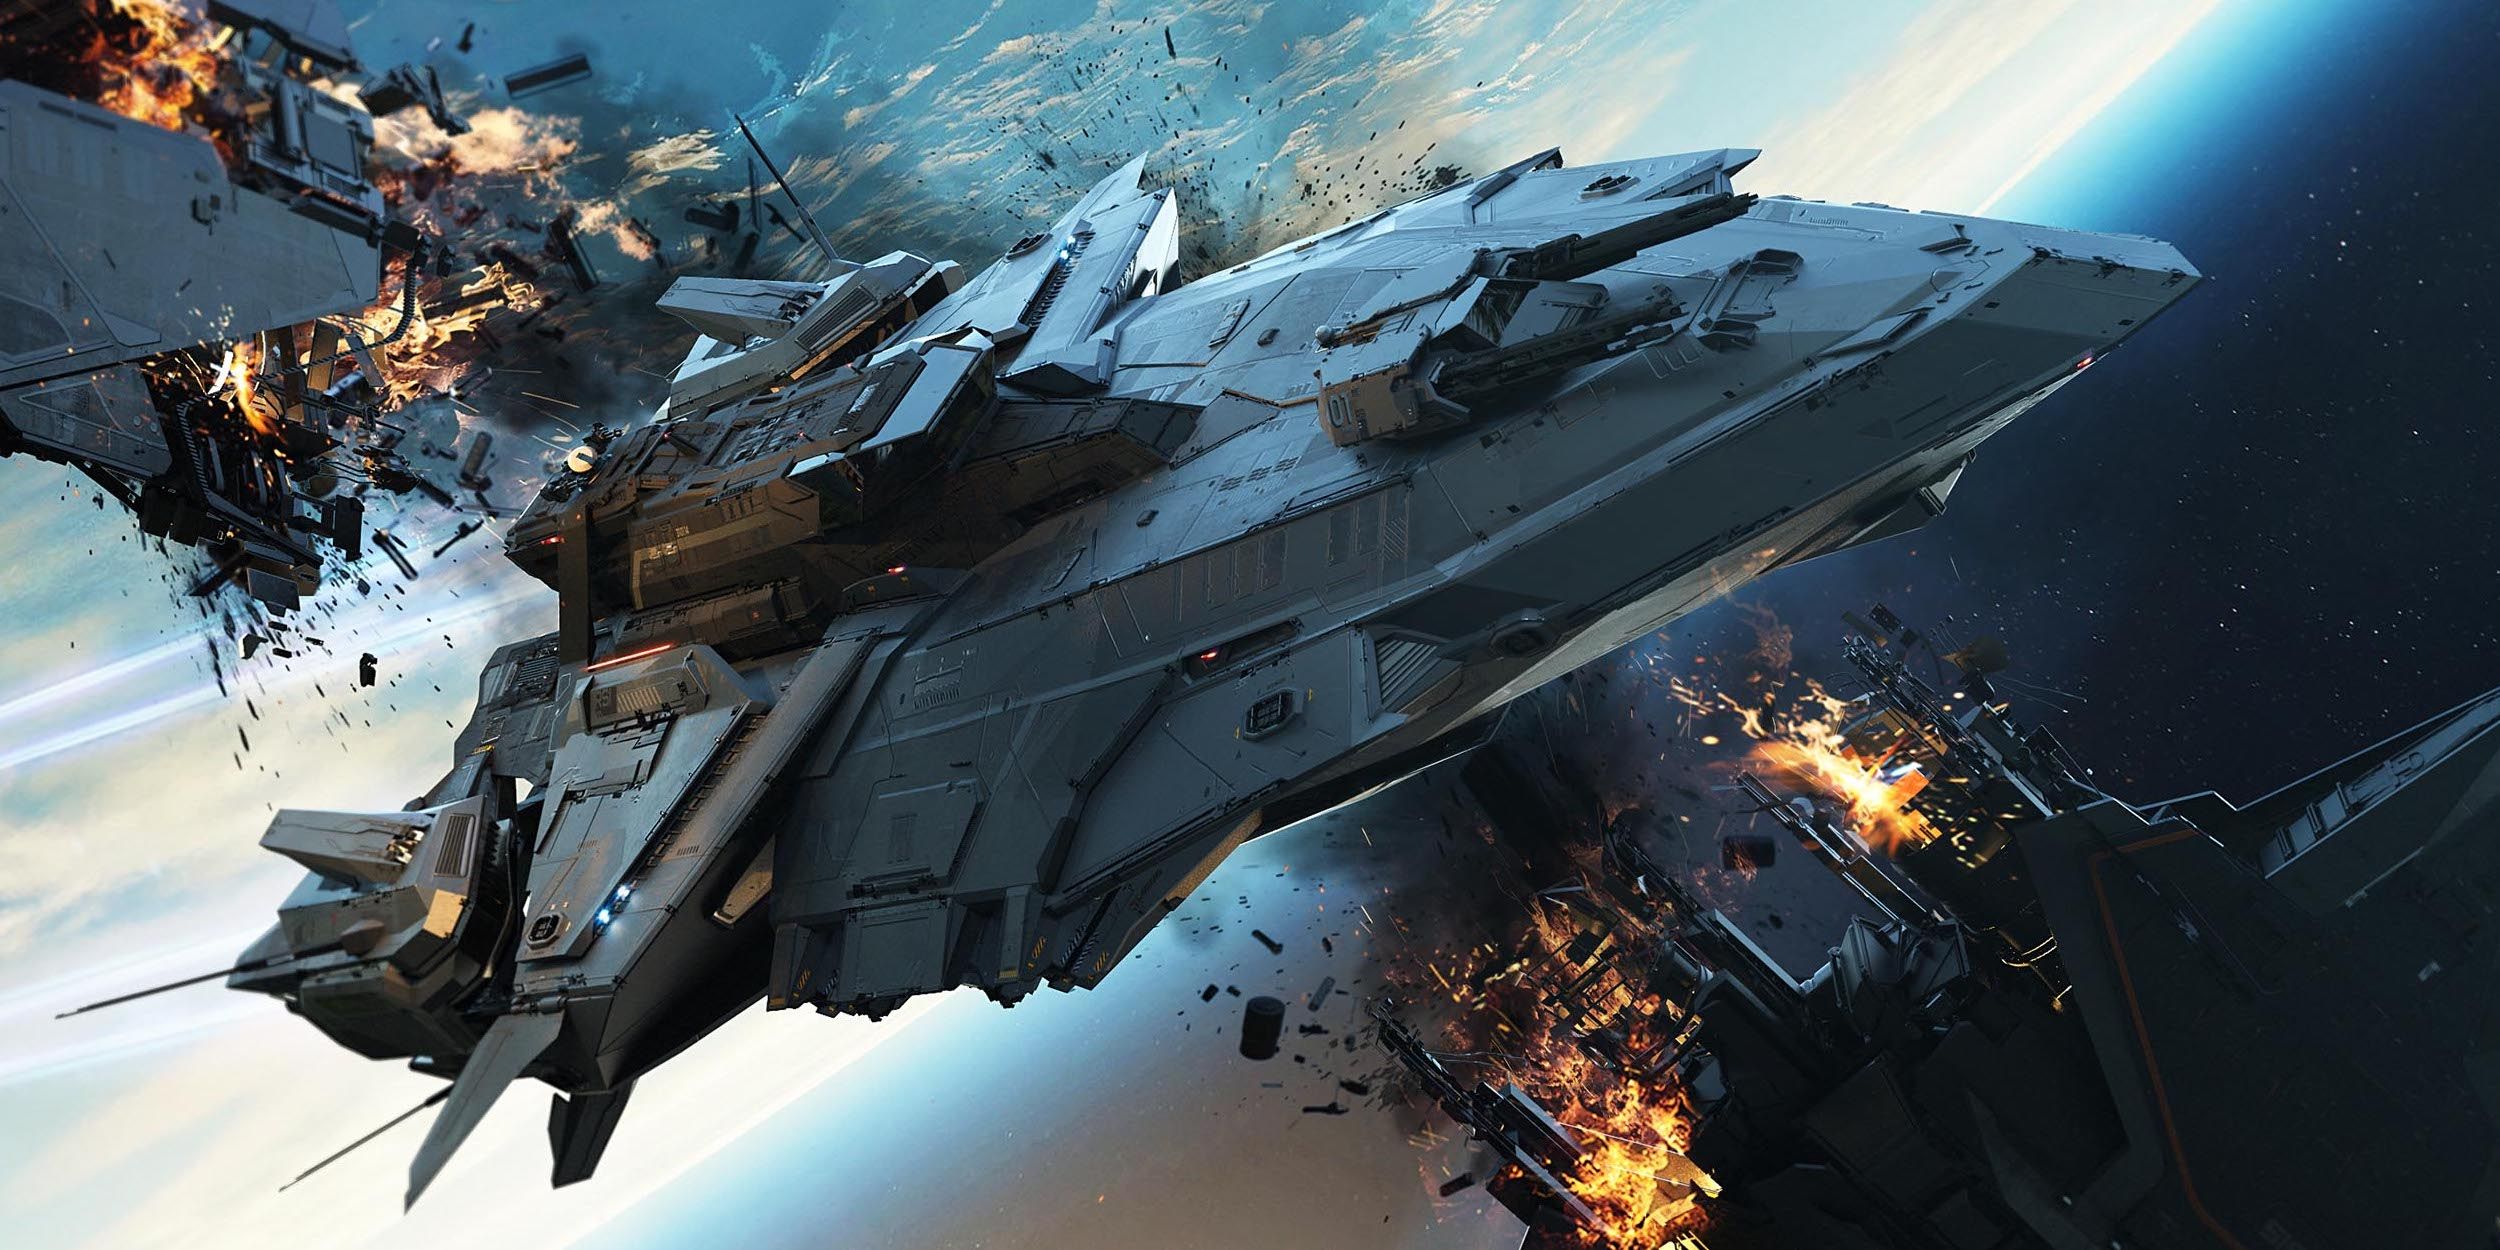 Star Citizen's New RSI Perseus Ship Will Cost Players 600 Dollars